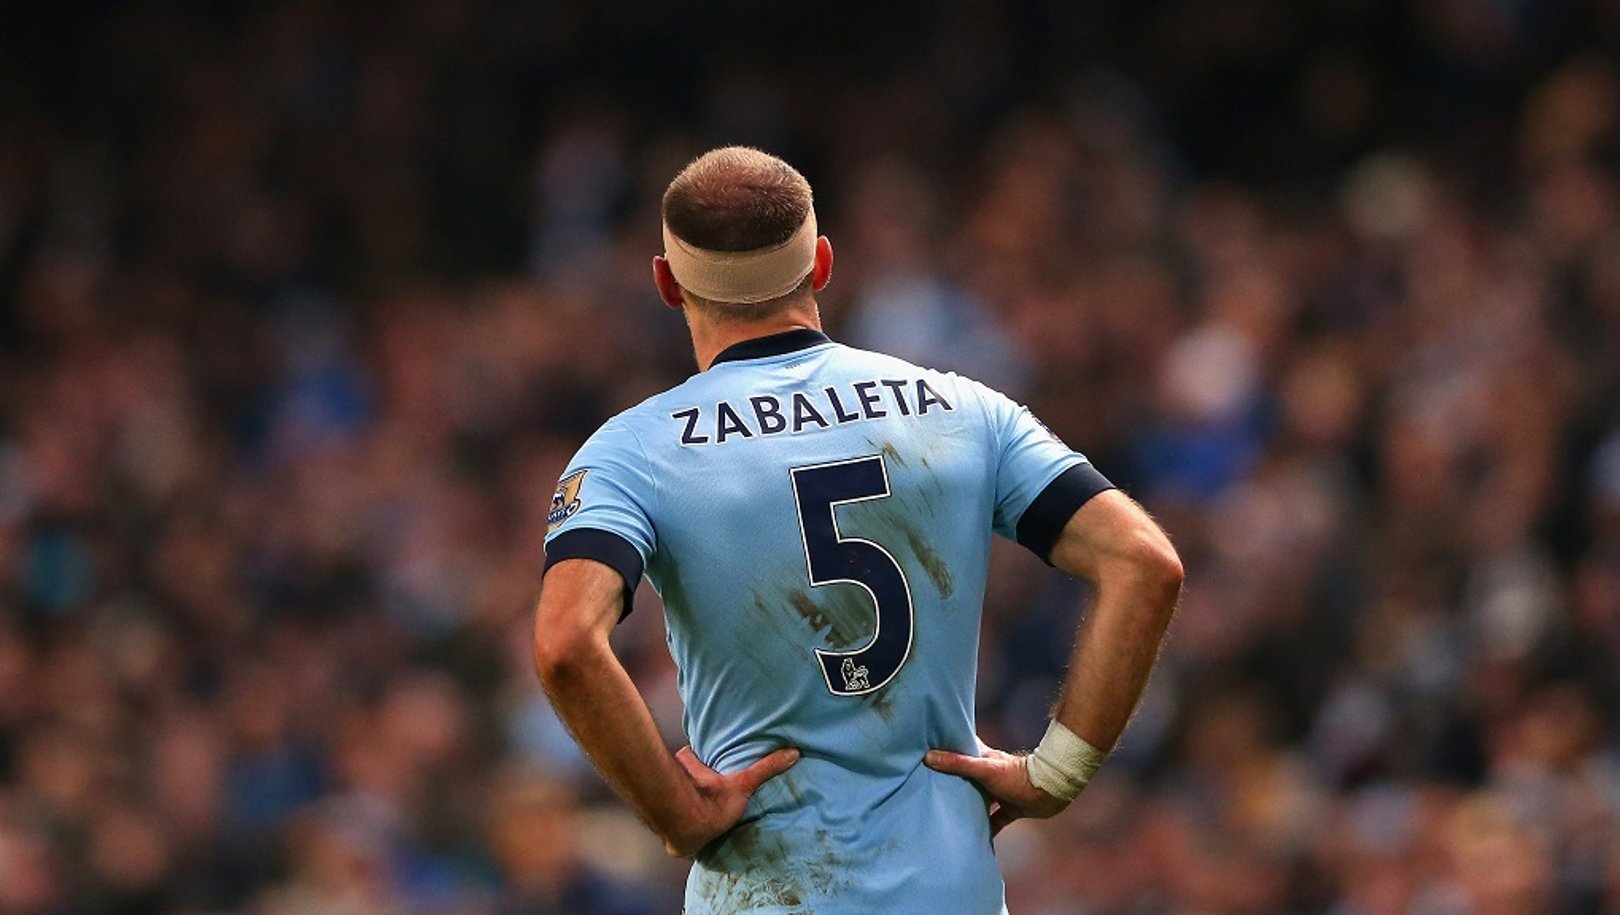 On this day: Zabaleta signs for City